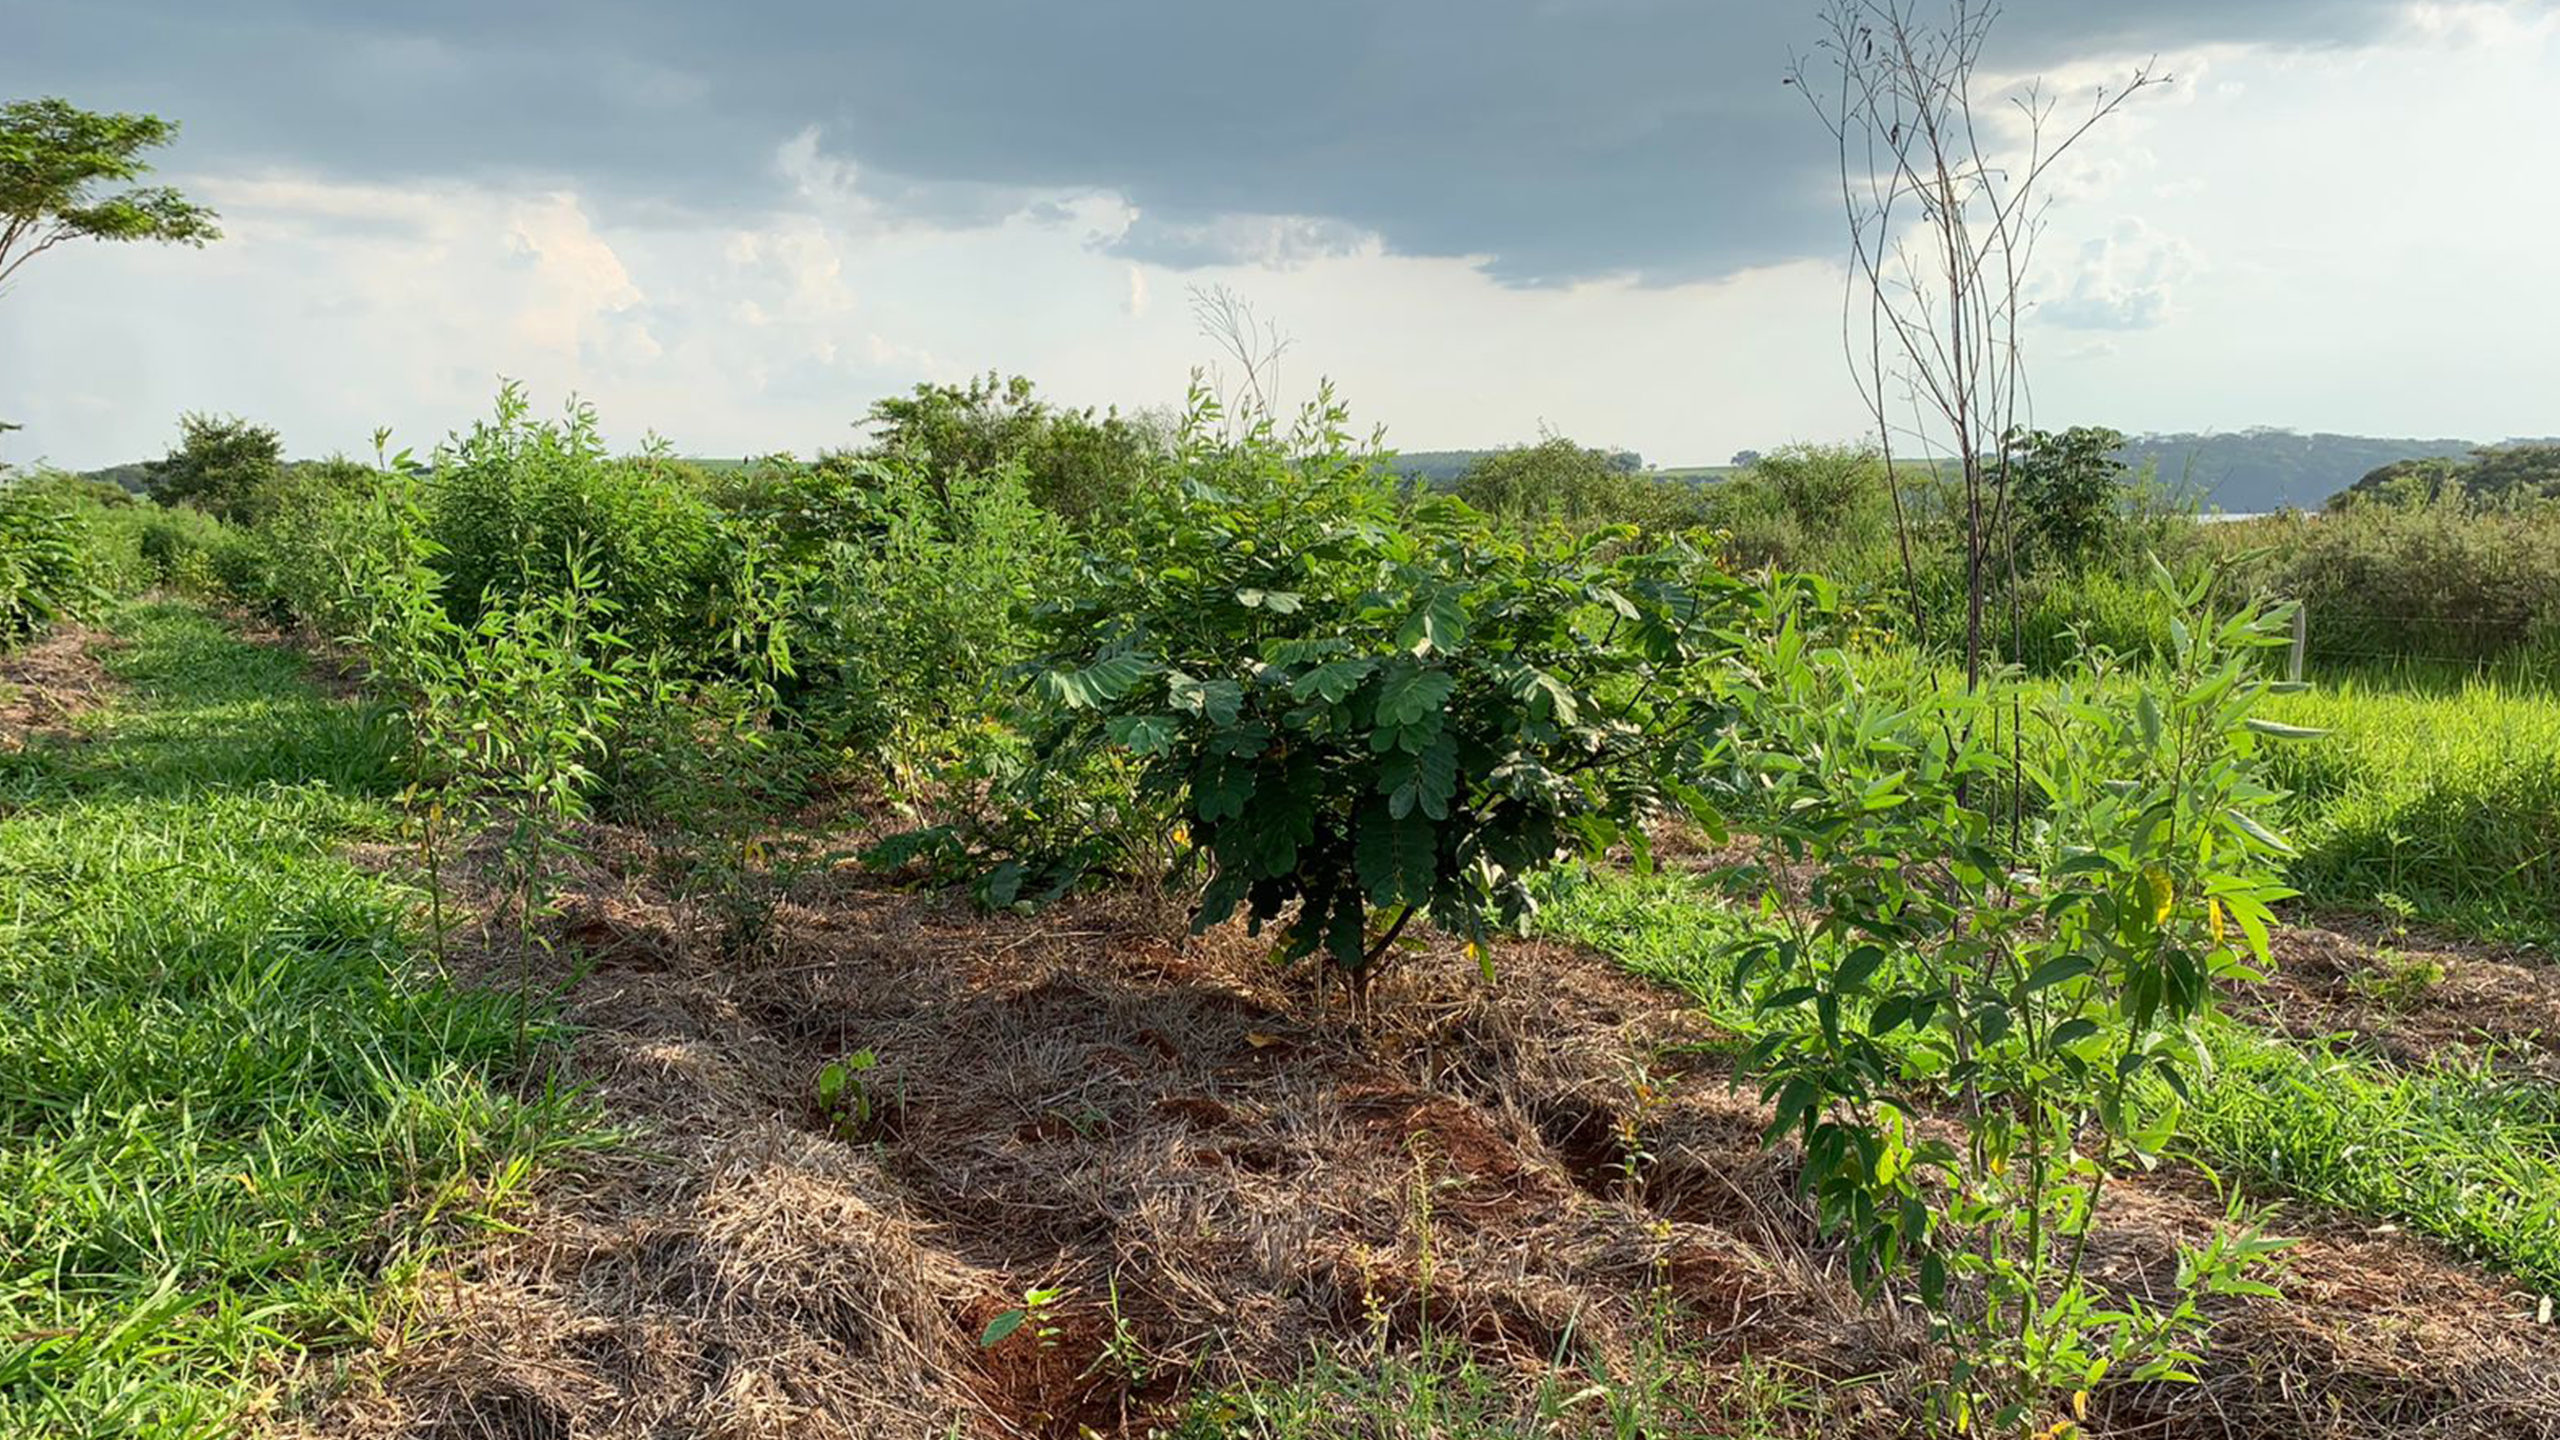 The project serves as the perfect opportunity to experiment with ways to reduce or eliminate the use of herbicides and pesticides by testing different spatial arrangements or species combinations, and developing best practices. © WeForest